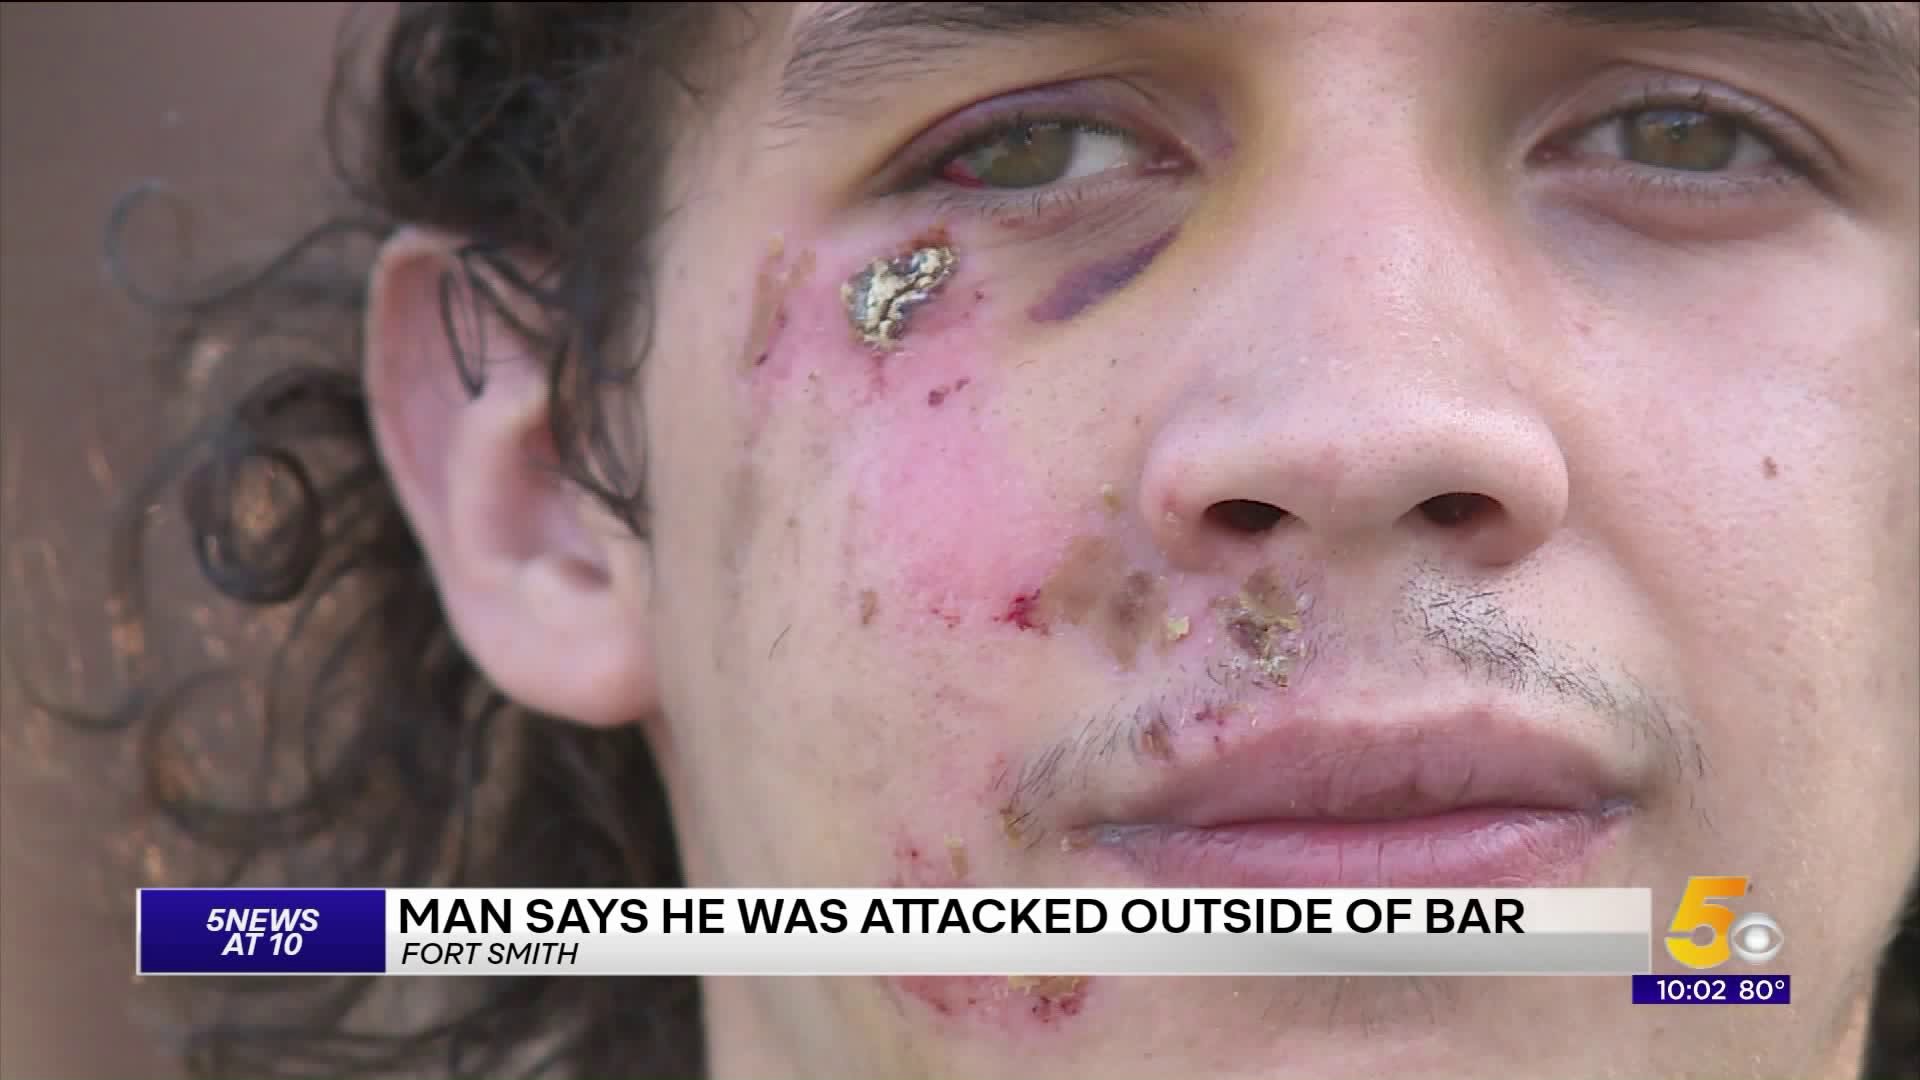 Fort Smith Man Says He As Attacked Outside Bar